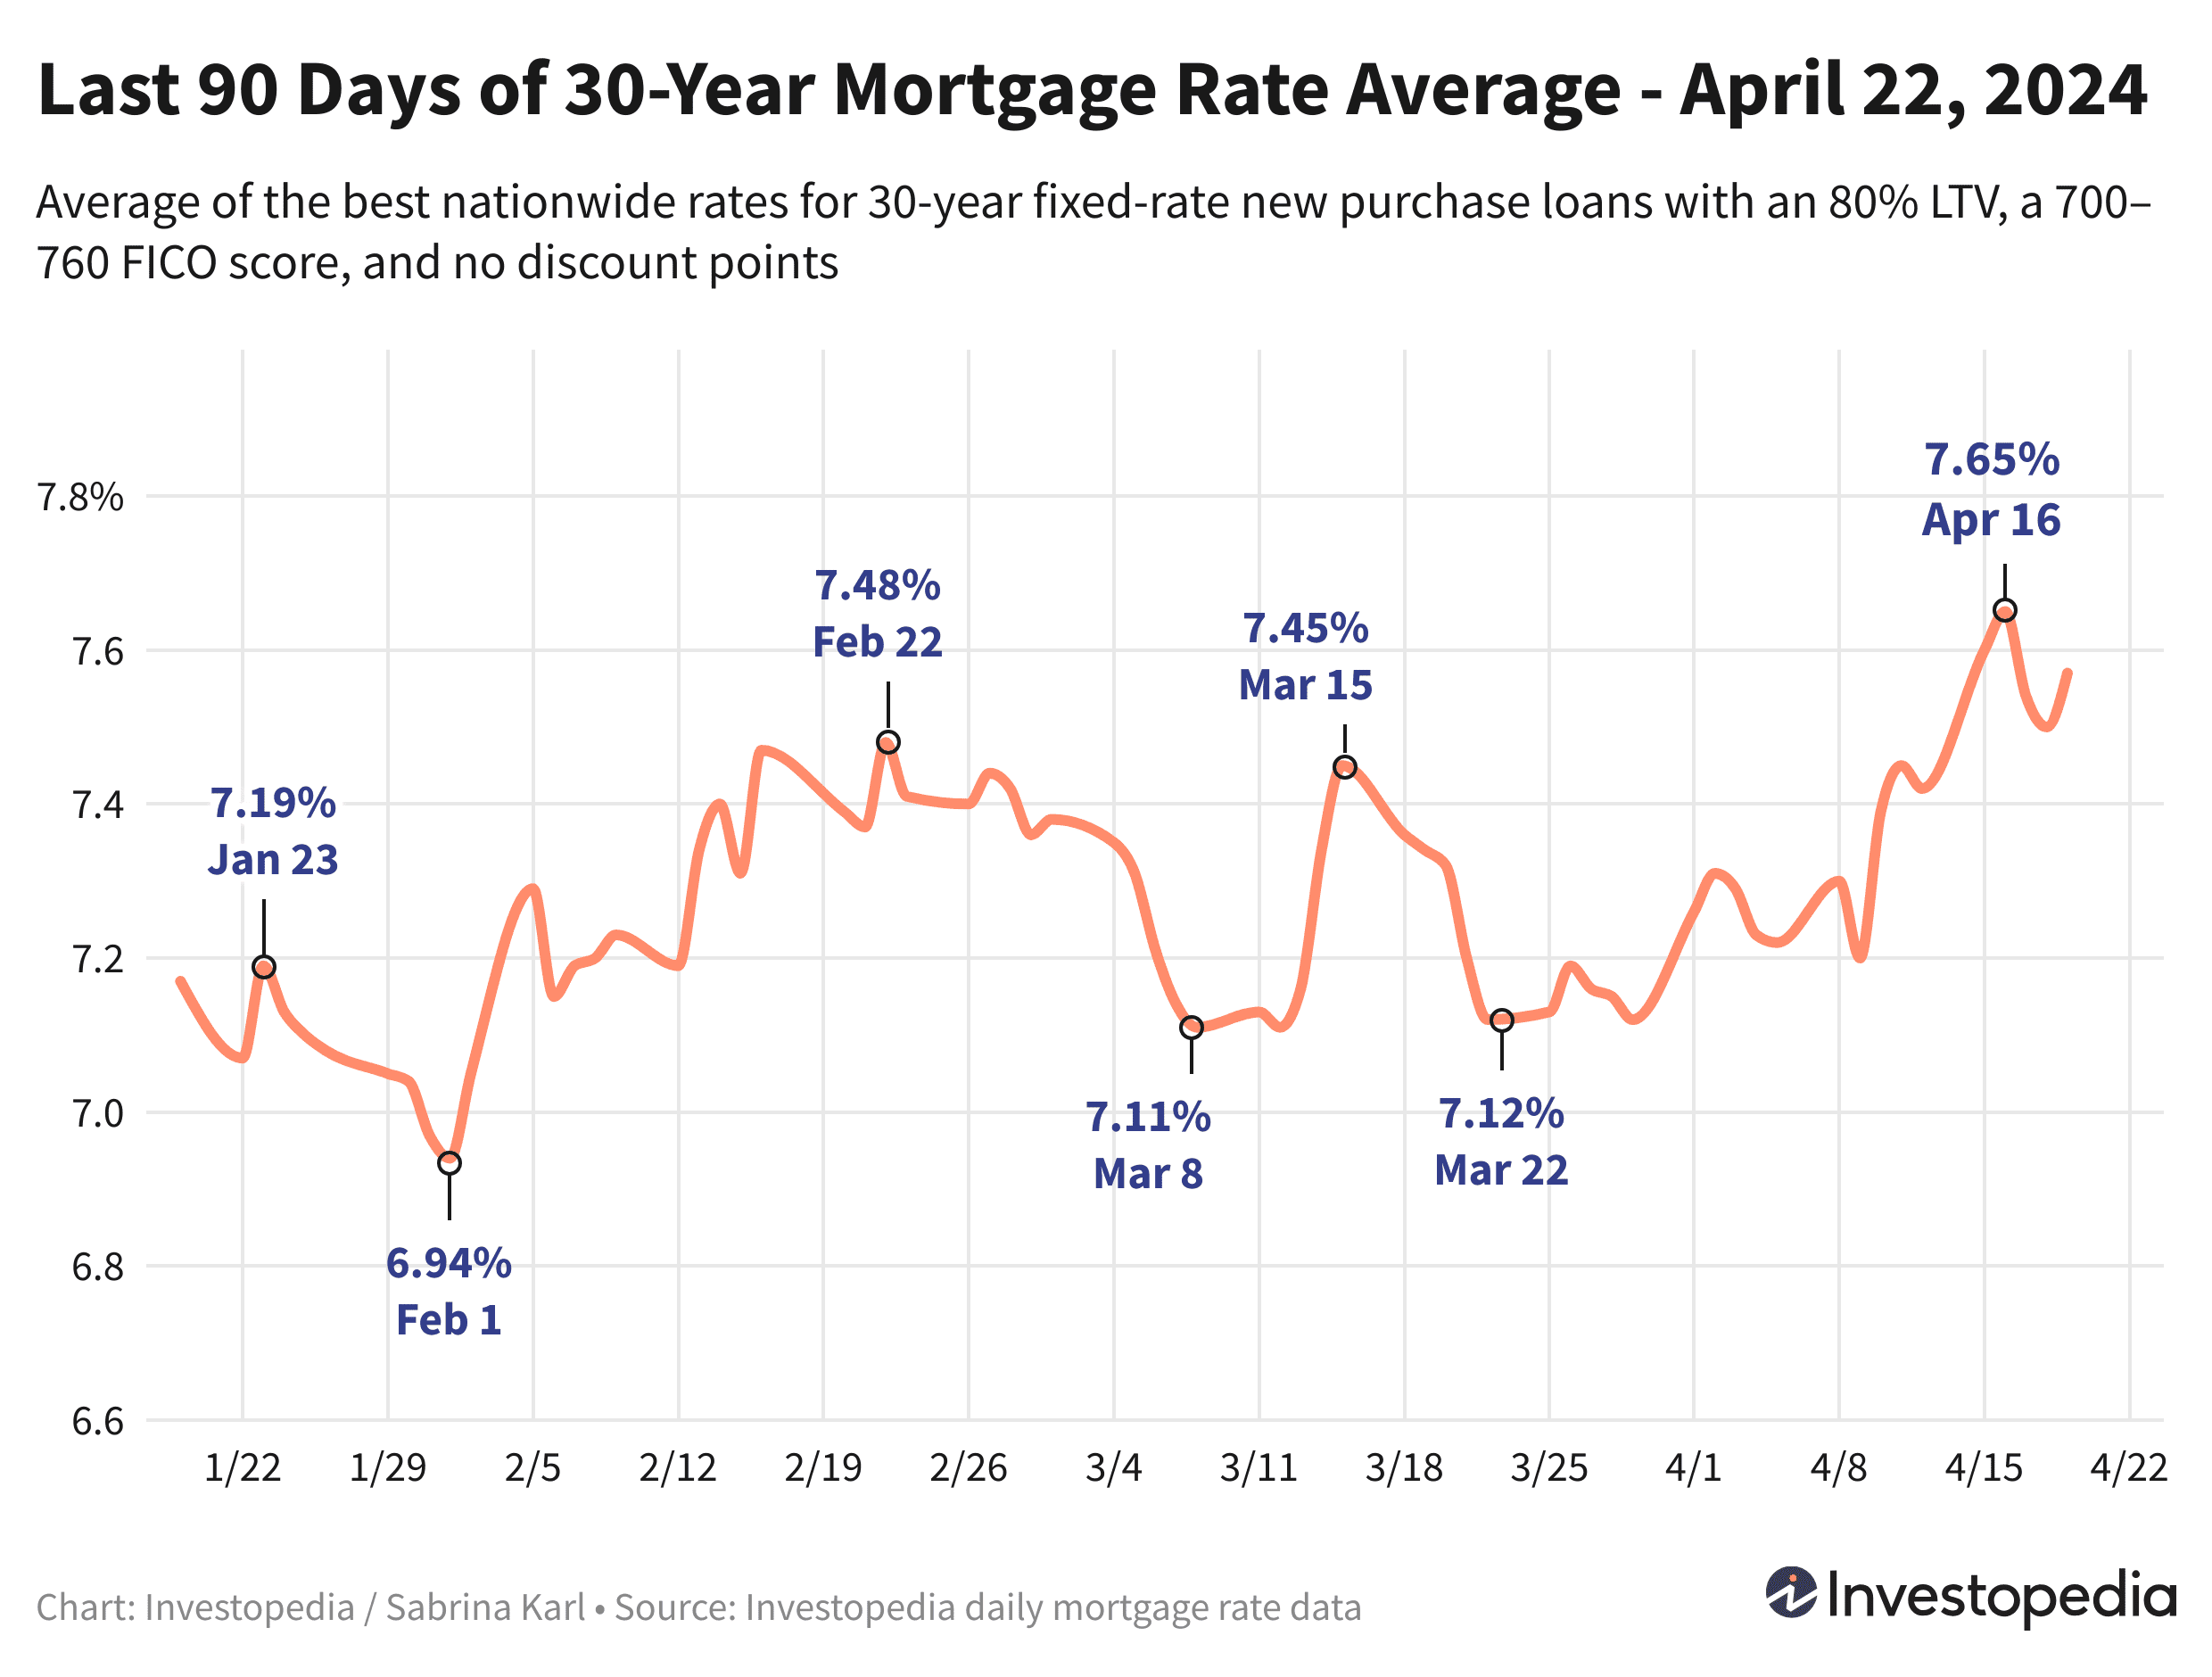 Line graph showing the last 90 days of the 30-year new purchase mortgage rate average - April 22, 2024